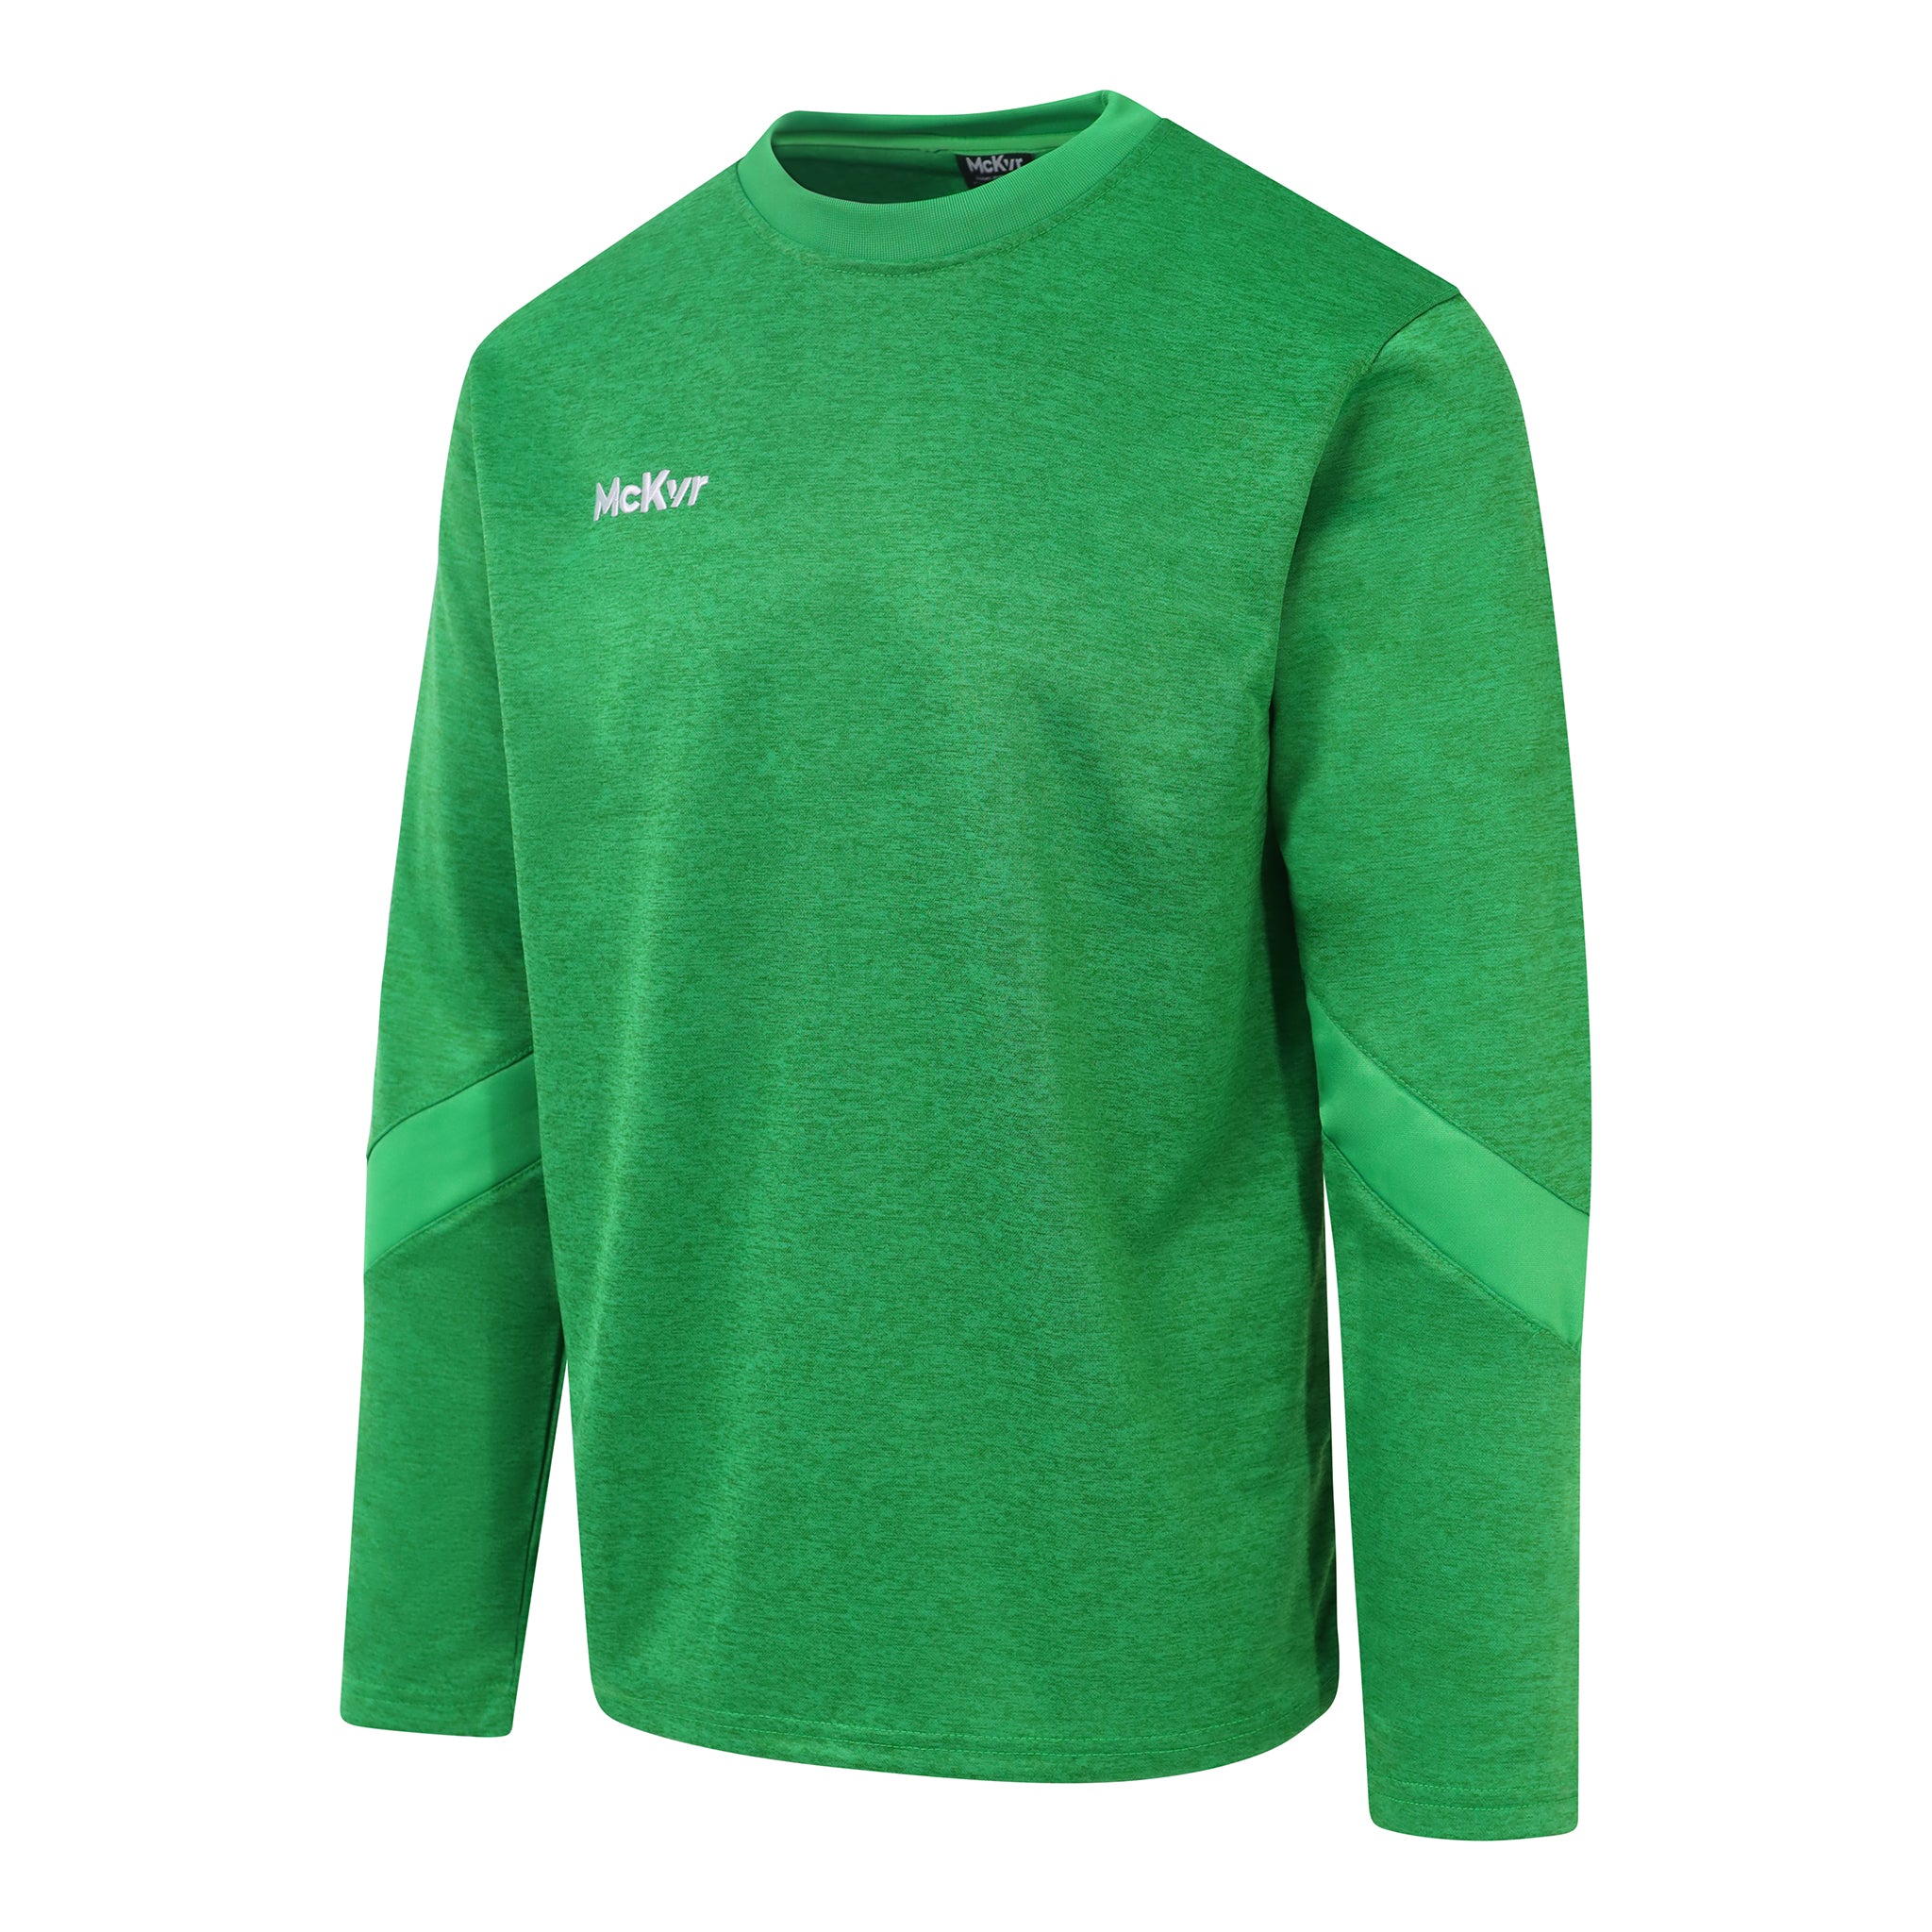 Mc Keever Core 22 Sweat Top - Adult - Green